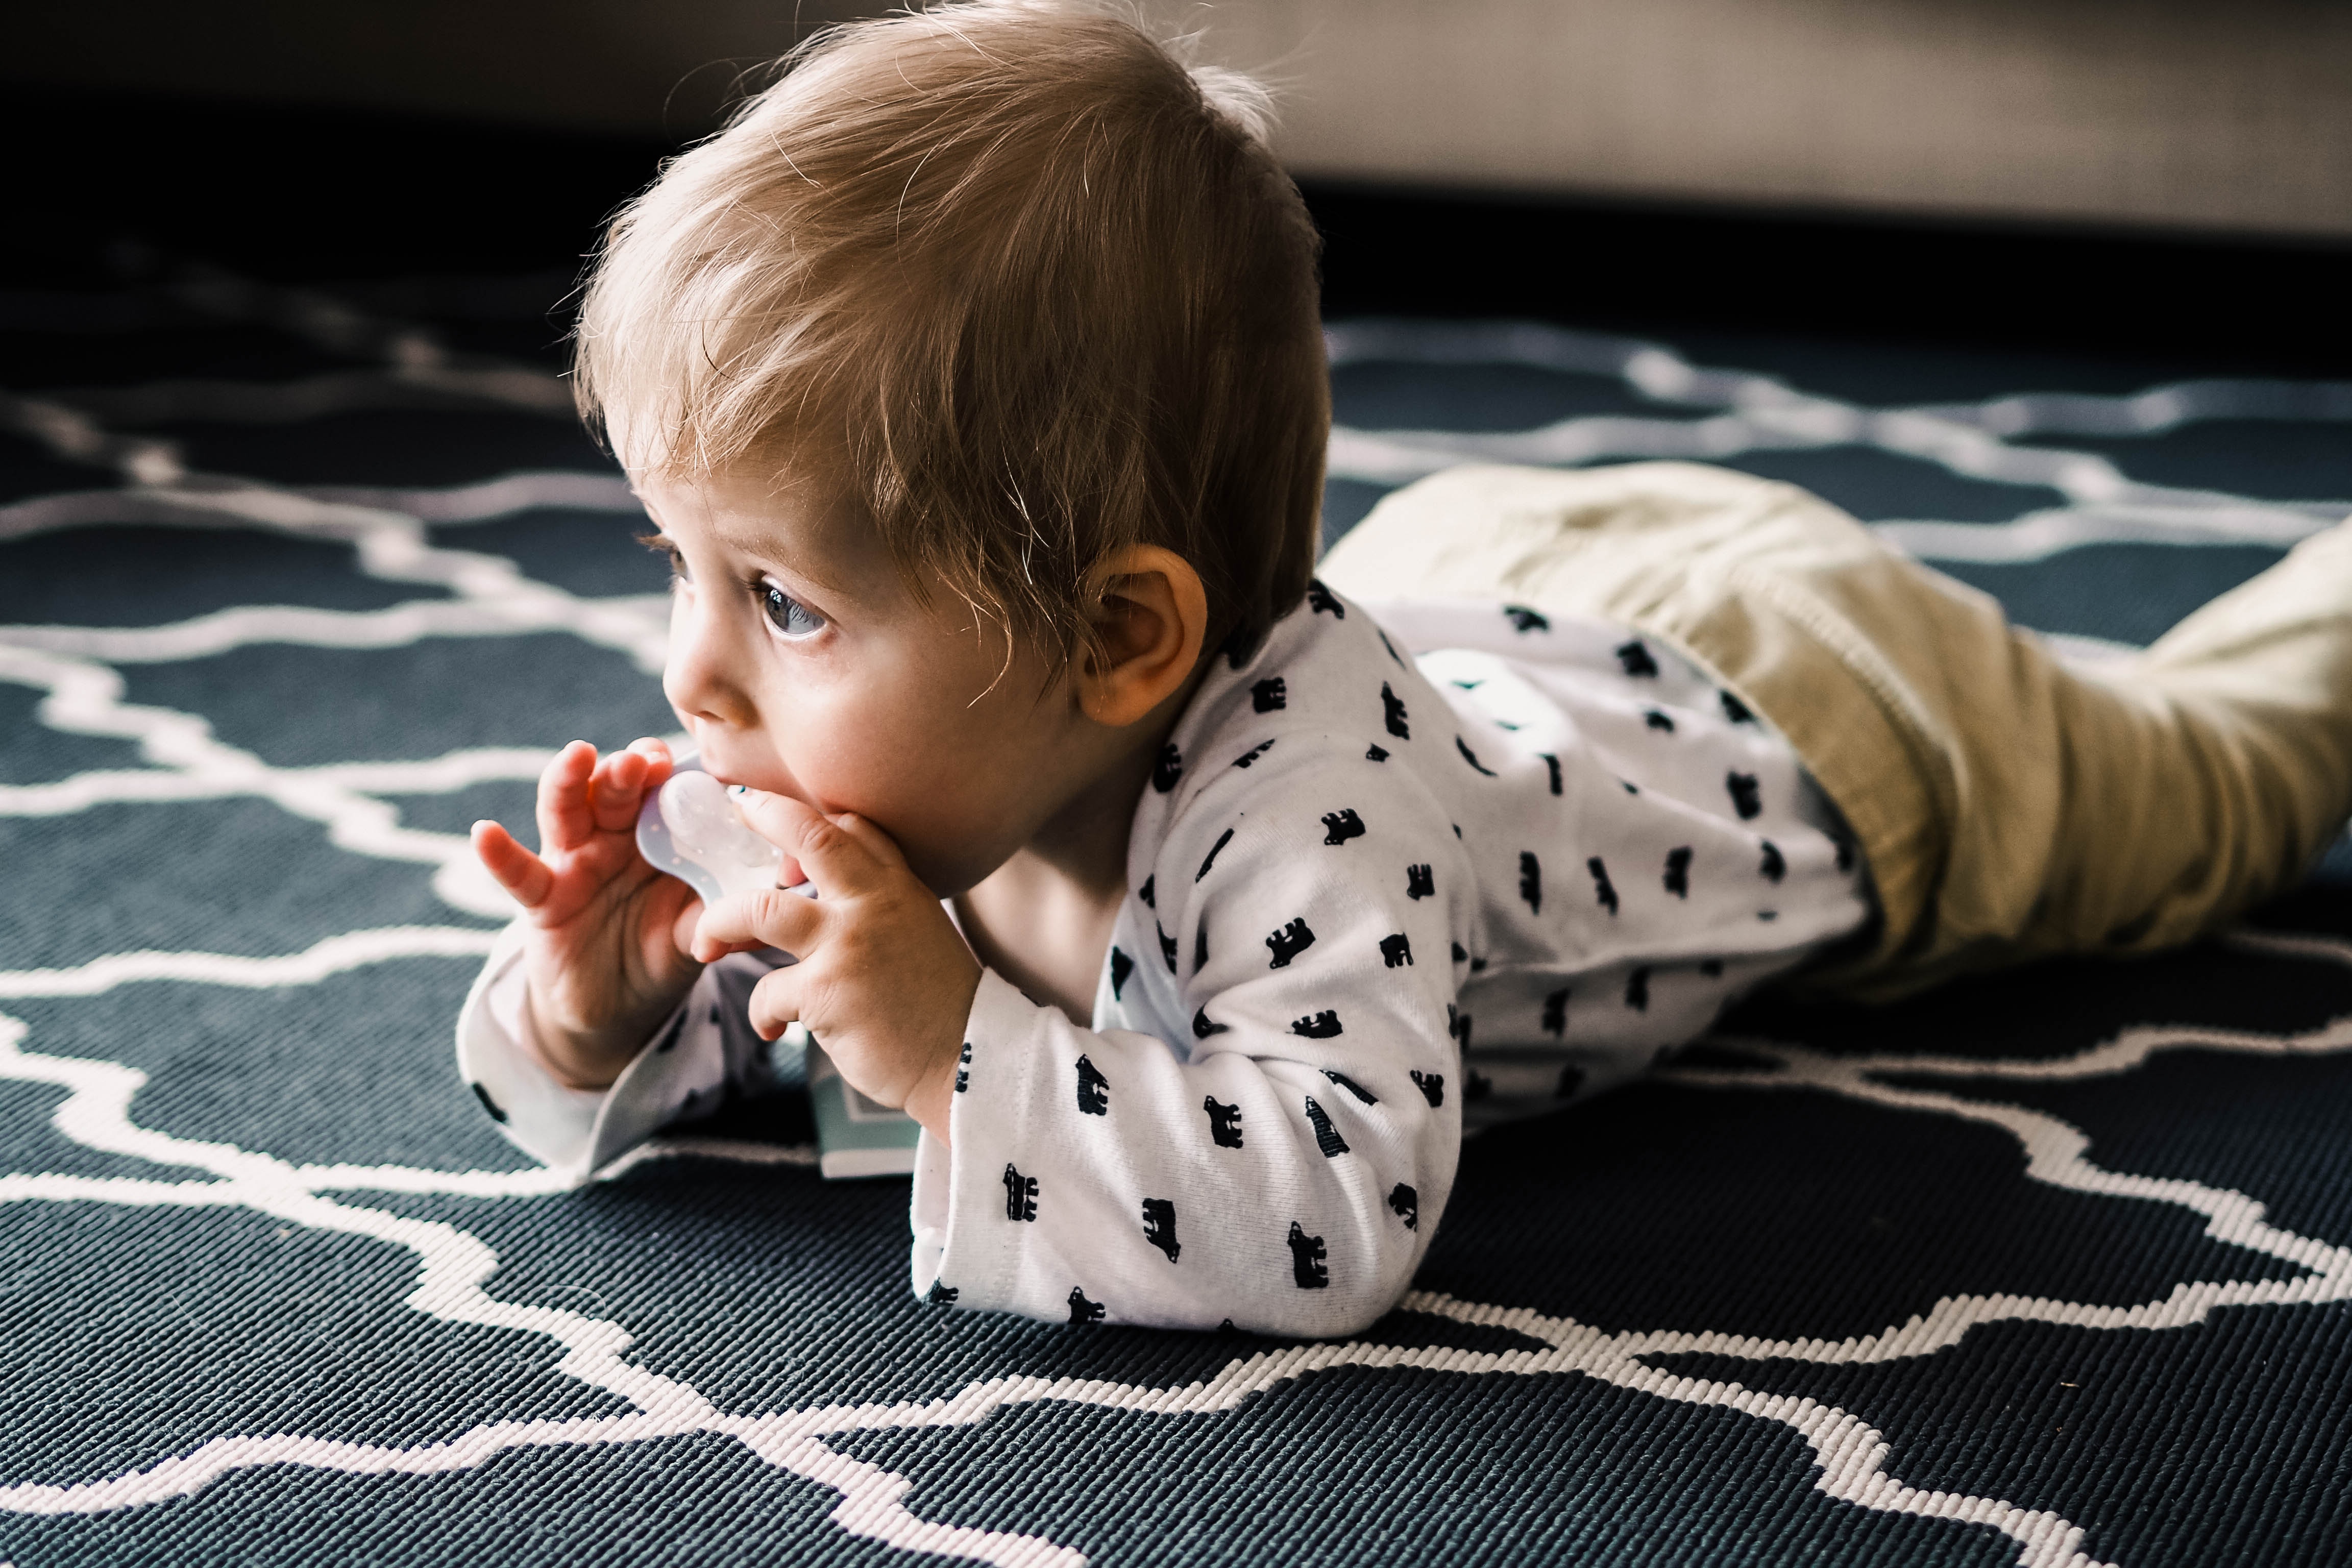 Schedule a rug cleaning to keep your air quality in tip top shape for your little ones.